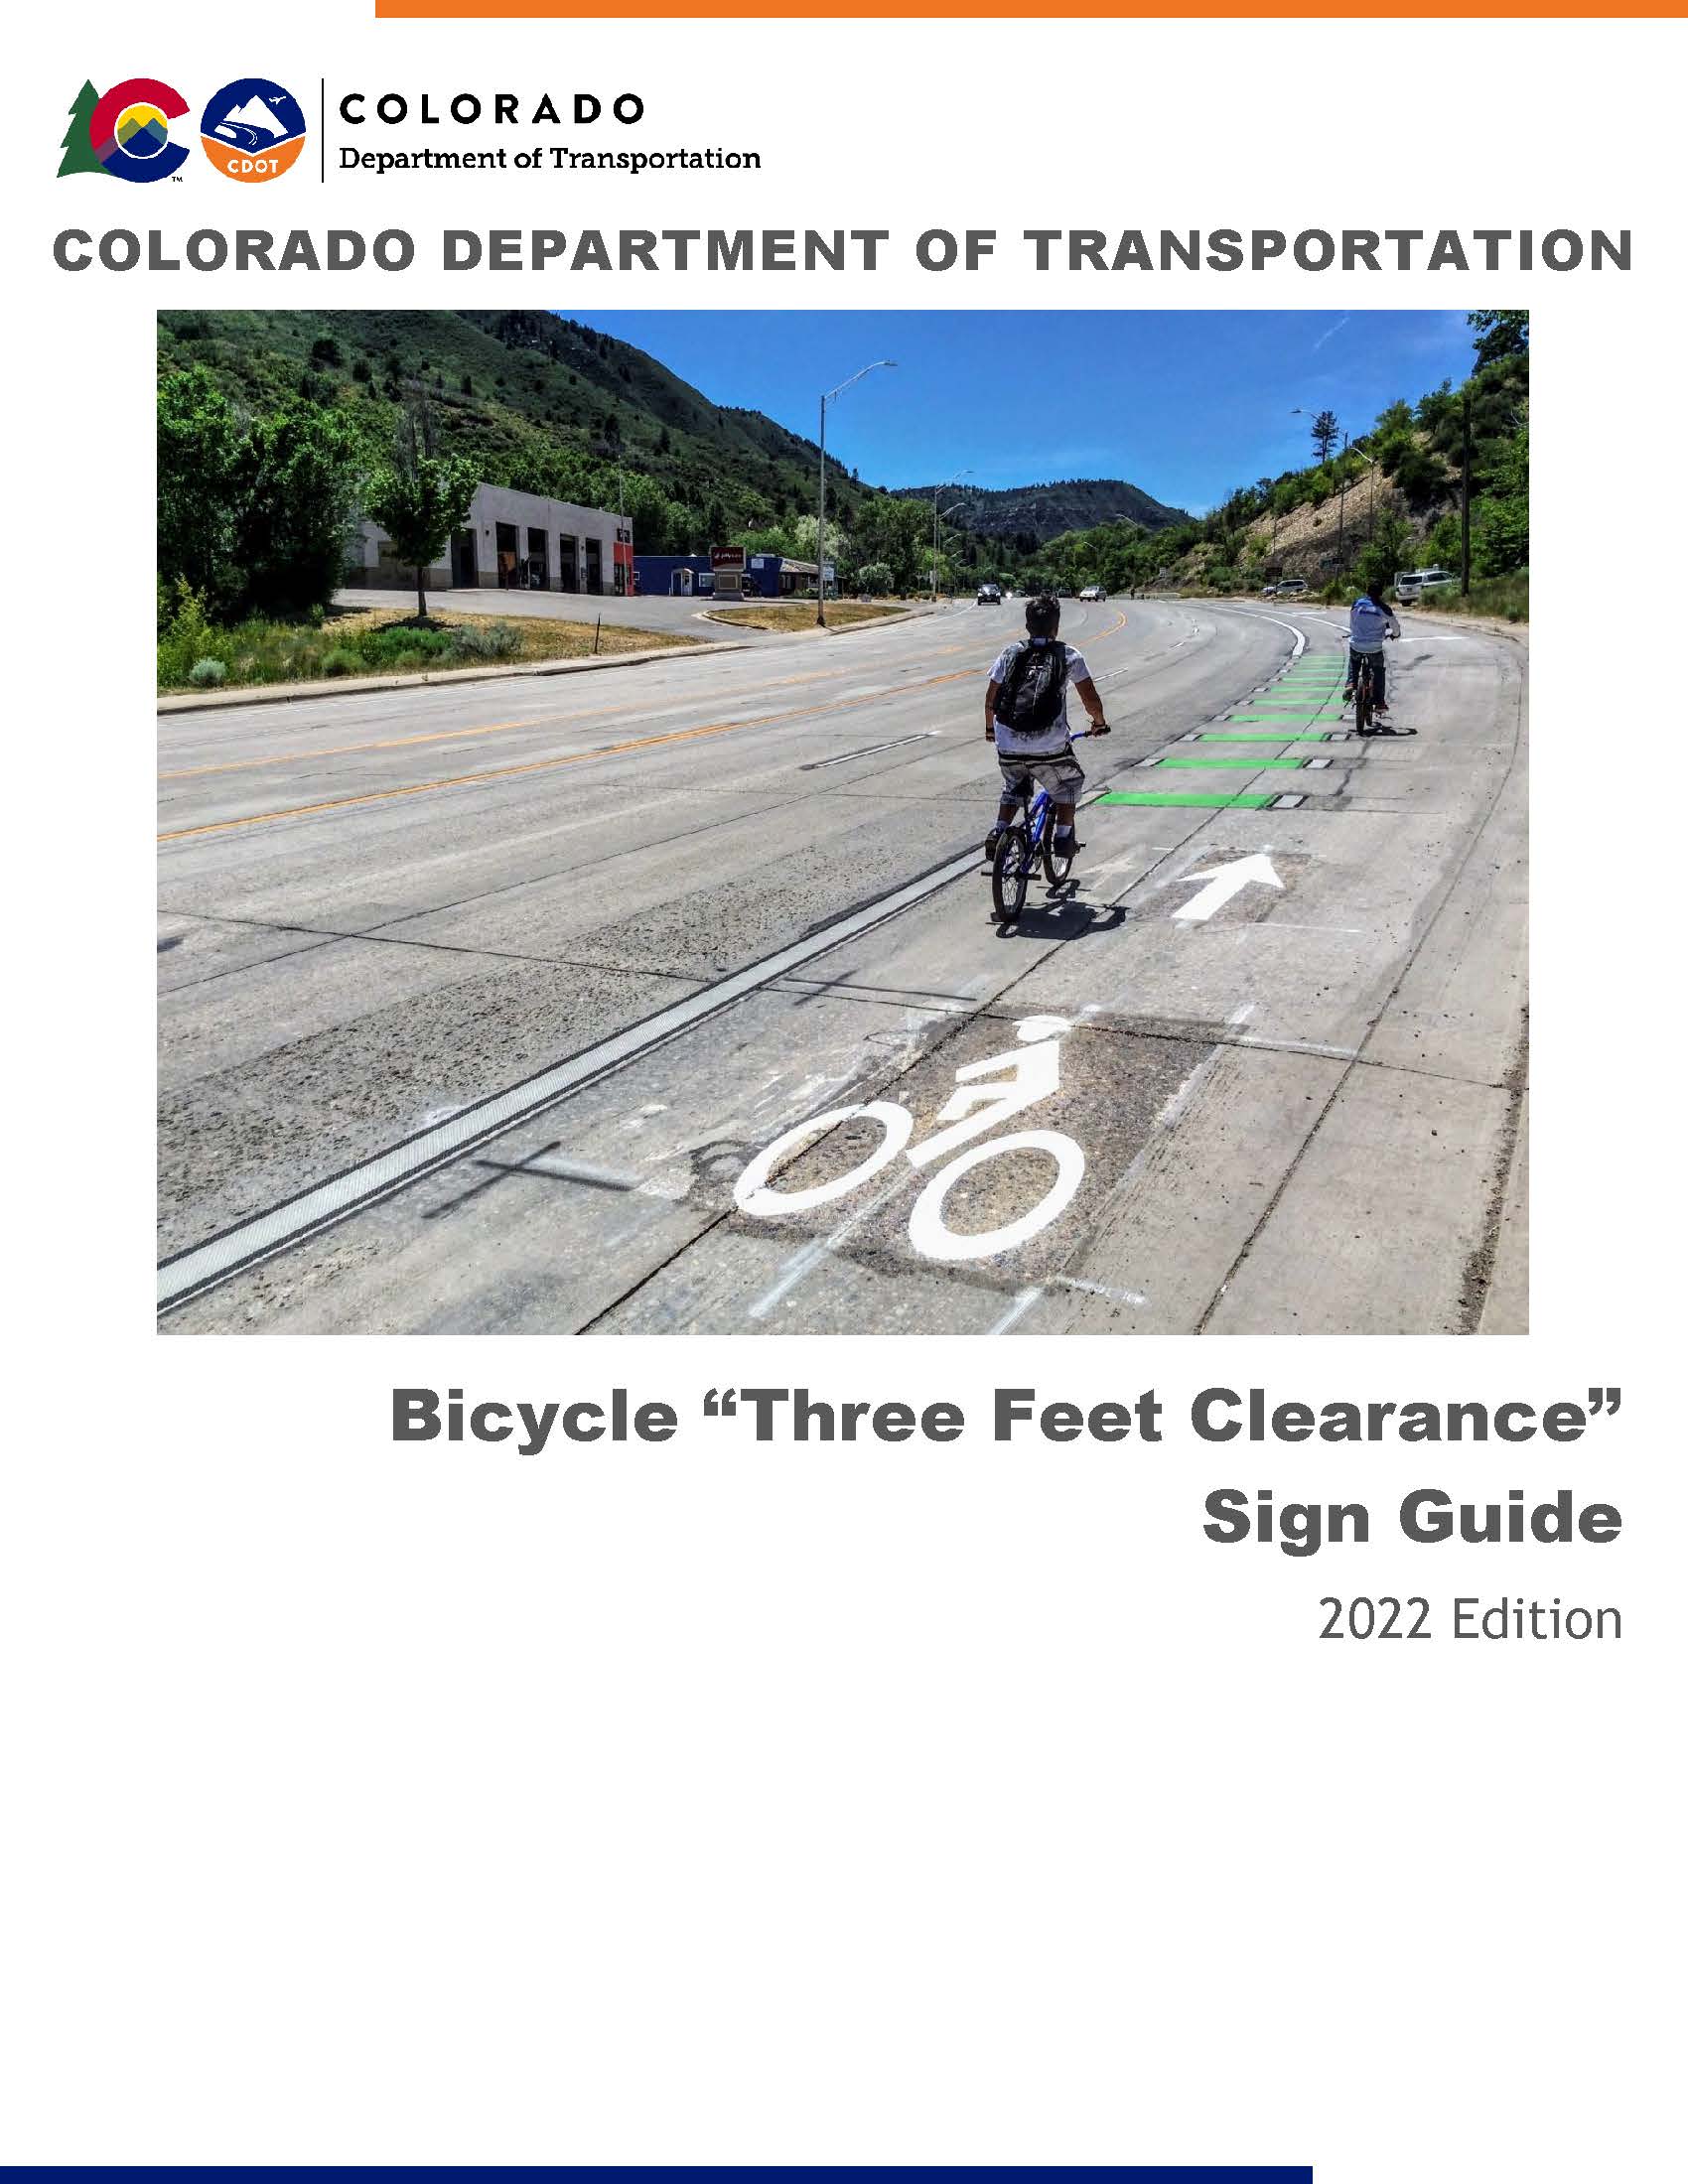 Bicycle Three Feet Clearance Sign Guide (2022).jpg detail image